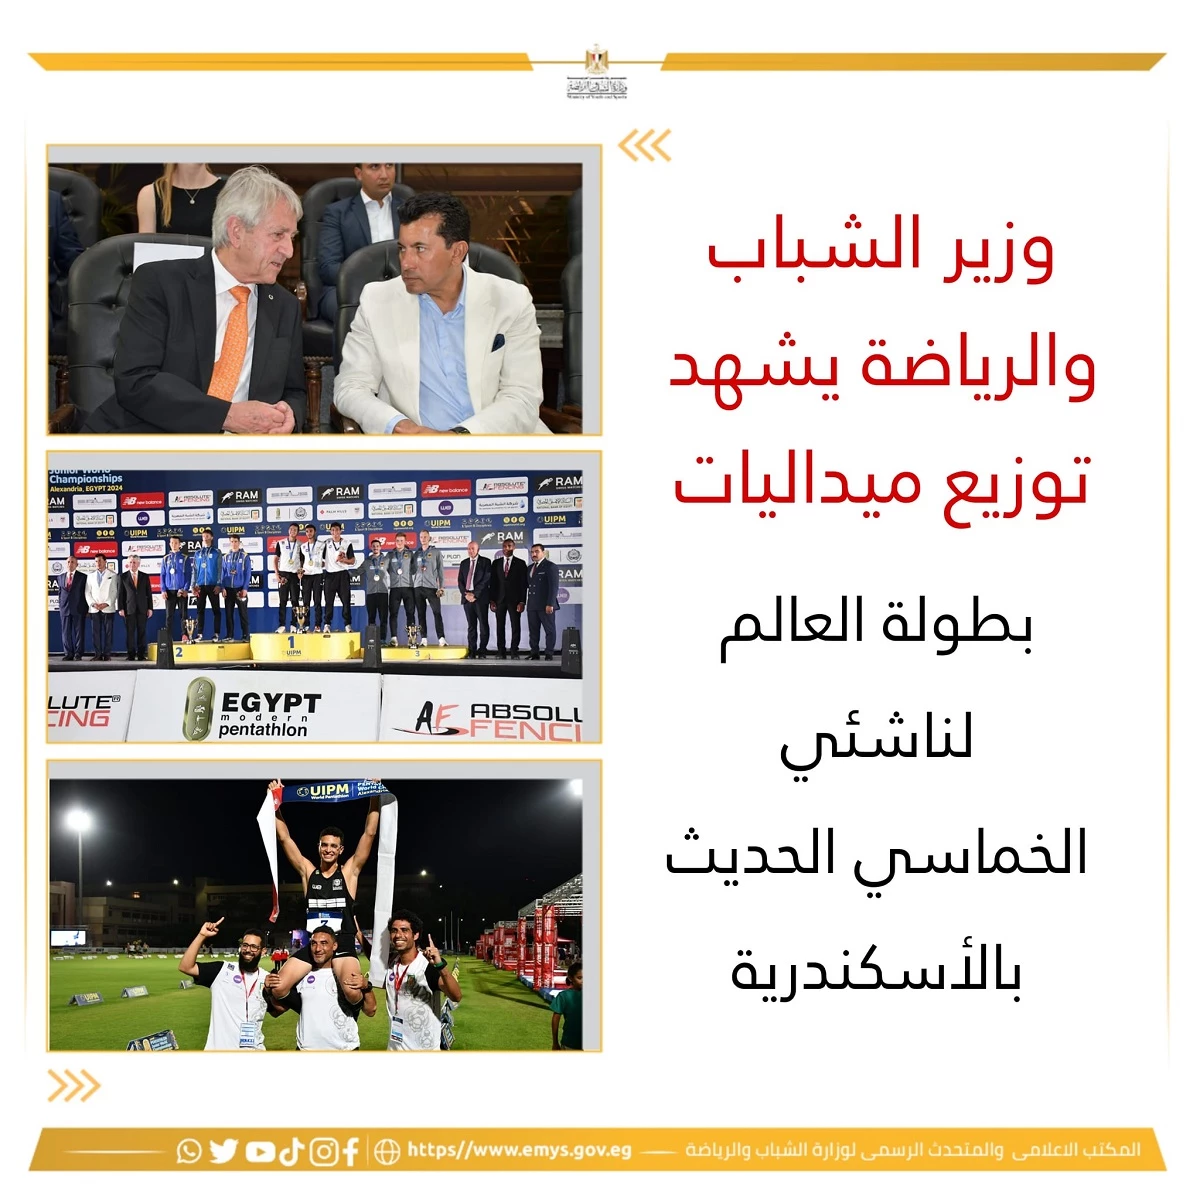 His Excellency Professor Dr. Ismail Abdel Ghaffar, President of the Academy, and Dr. Ashraf Sobhi, Minister of Youth and Sports, witnessed the distribution of medals for the World Junior Modern Pentathlon Championship, which was held on the stadiums The Arab Academy for Science, Technology and Maritime Transport in Alexandria during the period (25-30) June 202416